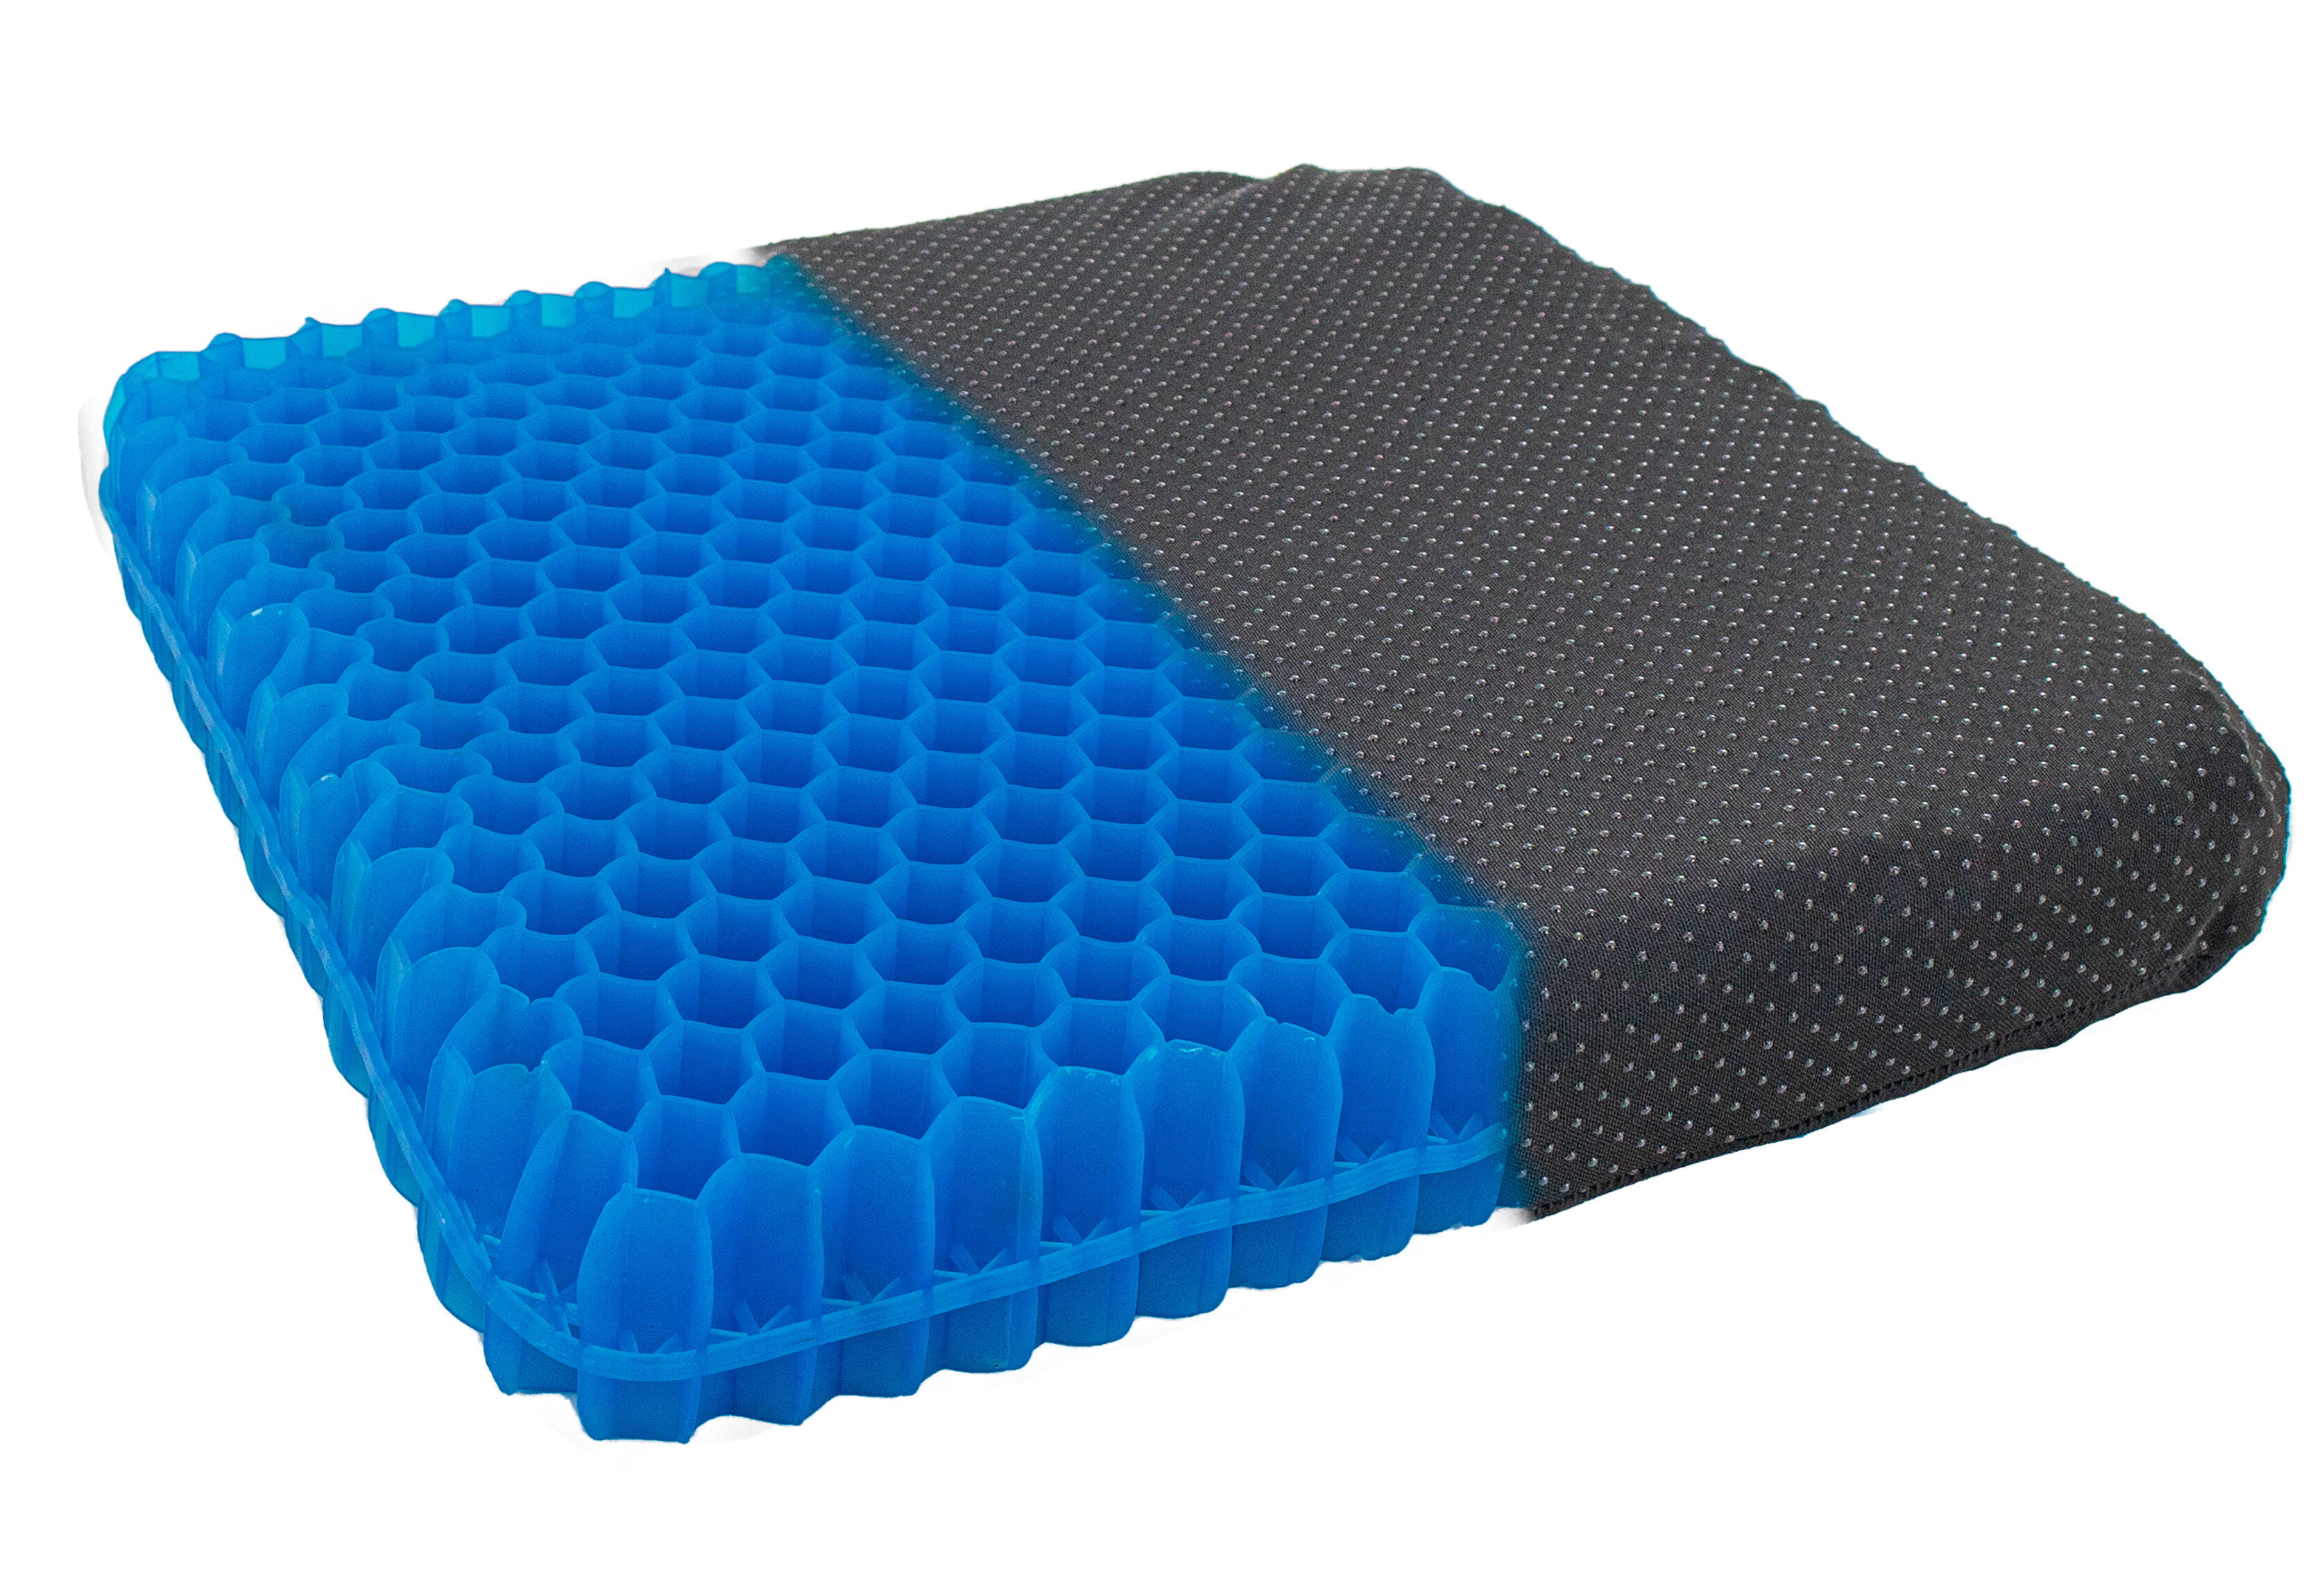 Summer Gel Seat Cushion Breathable Honeycomb Design For Pressure